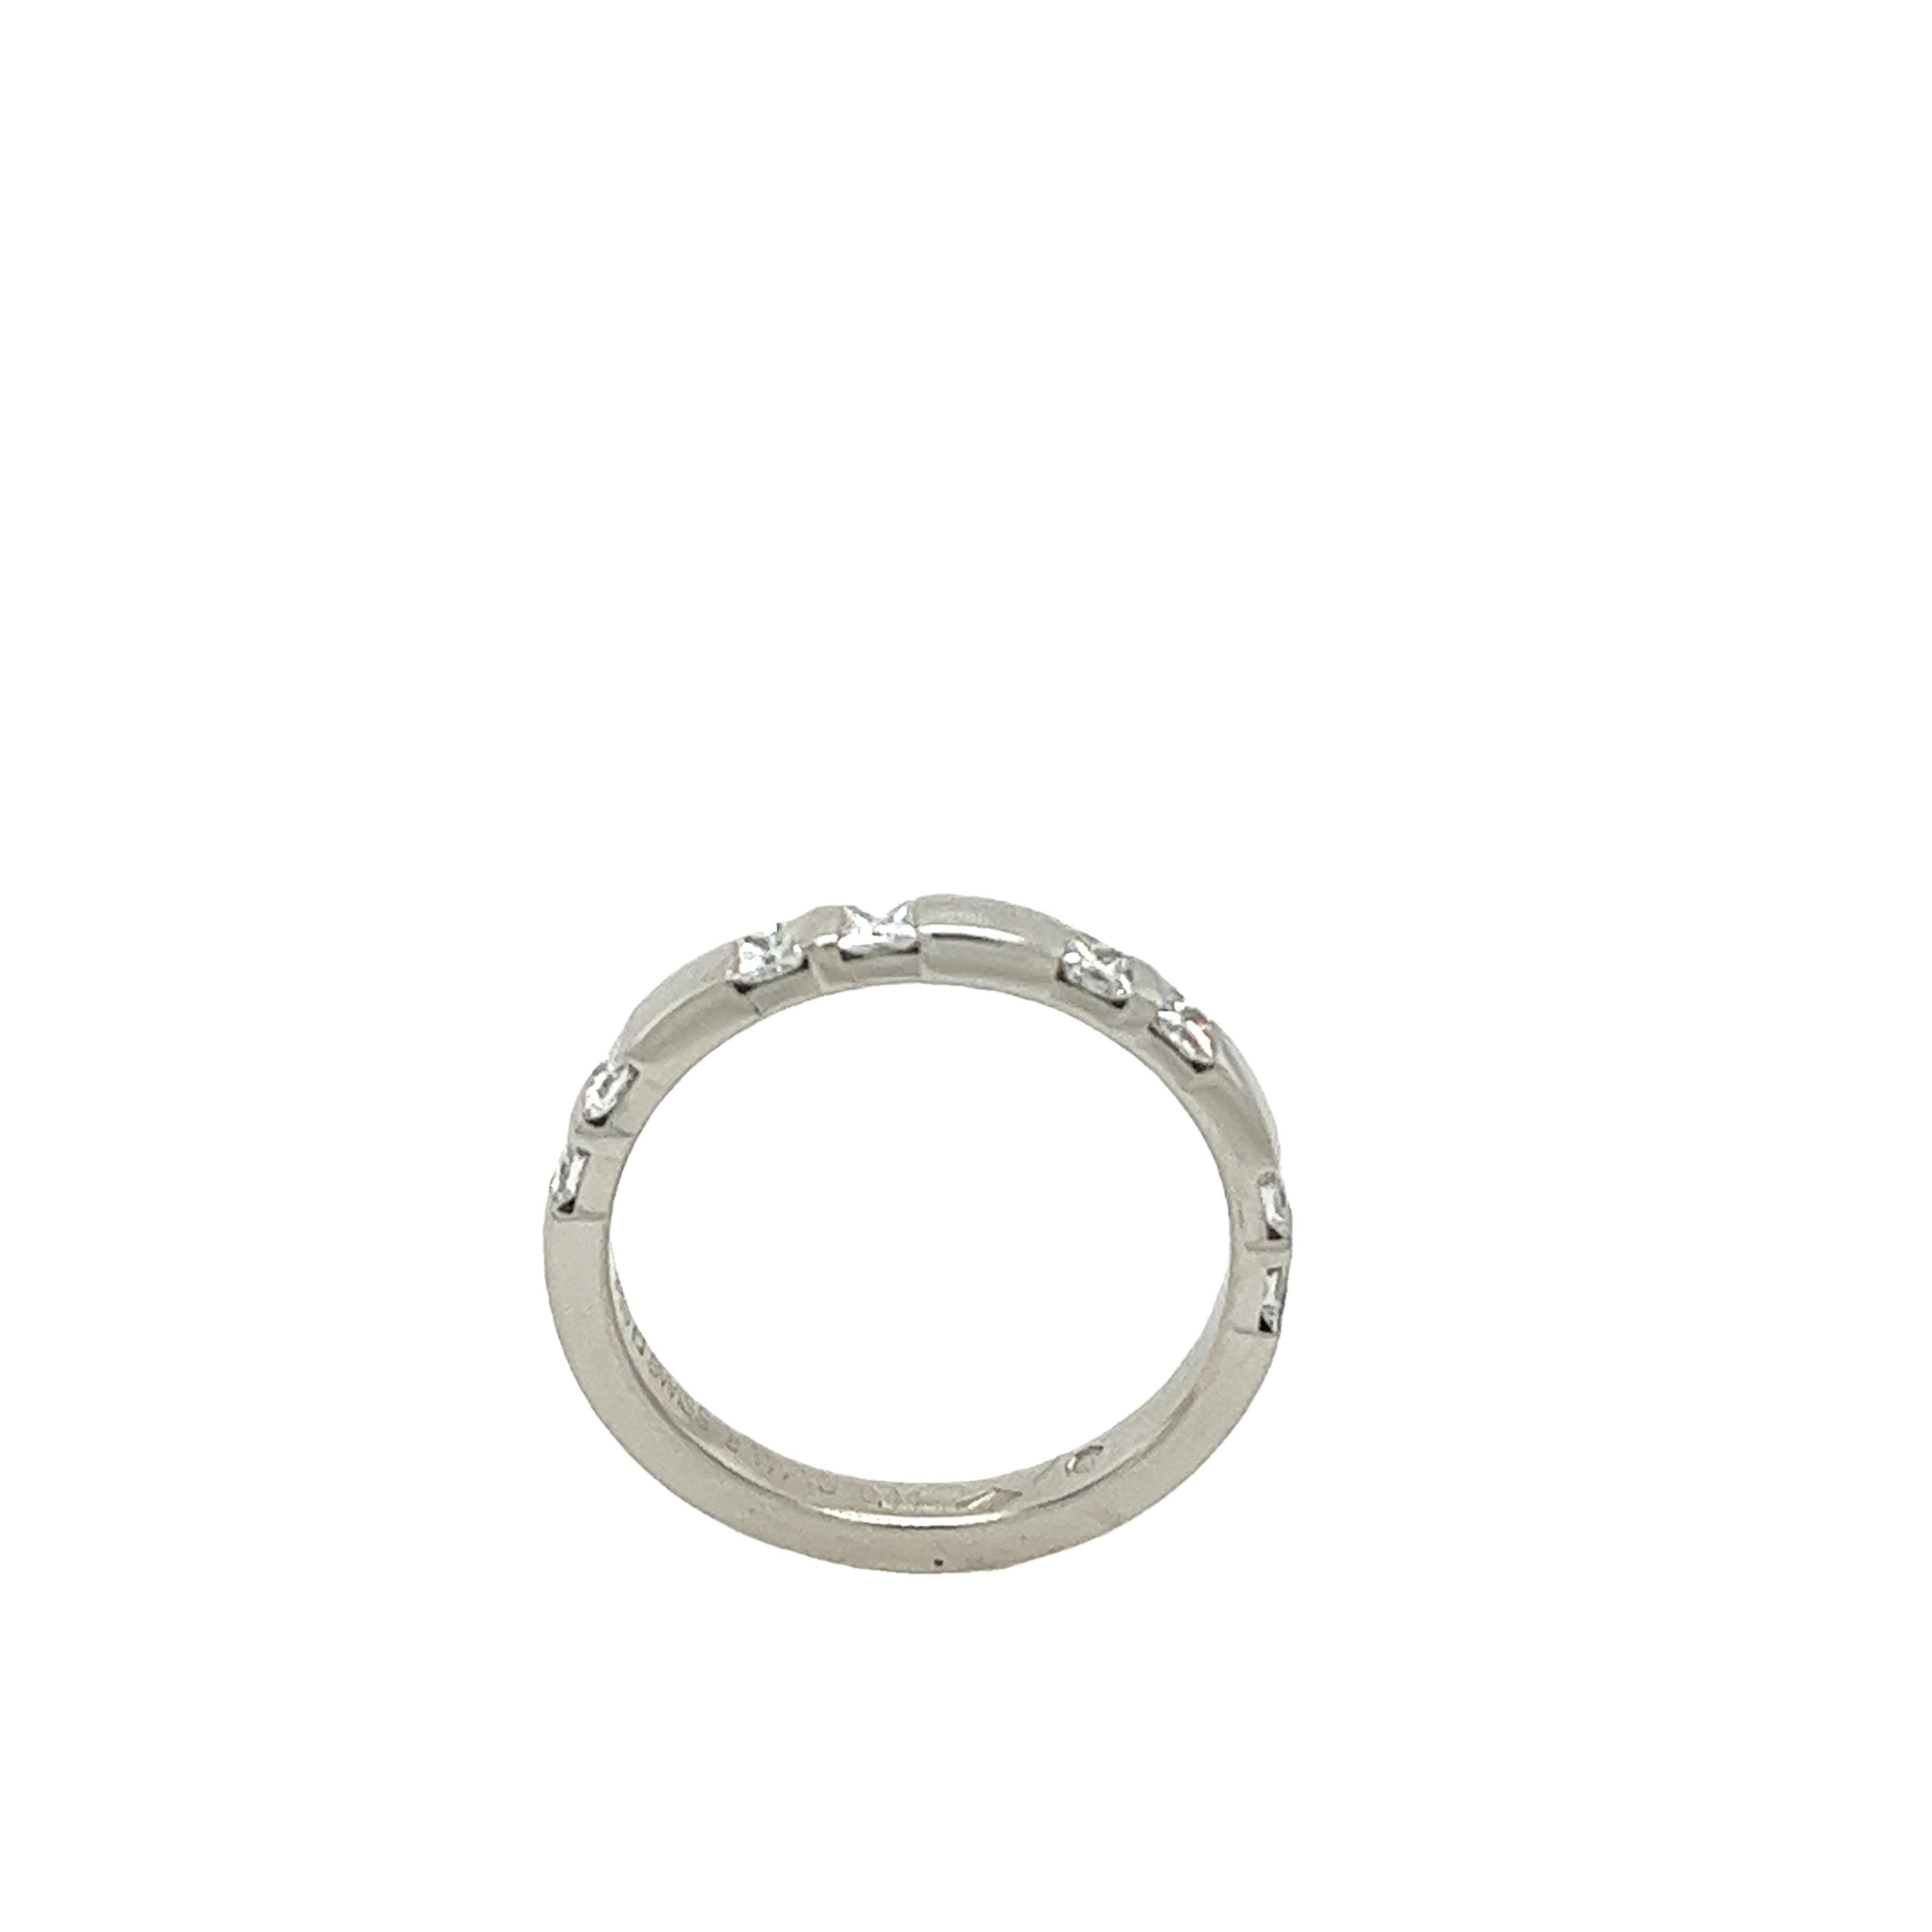 A simple and elegant design with stunning 0.44ct of natural princess cut
diamonds, this platinum ring is perfect for 
a wedding band or as an eternity ring. 
Total Diamond Weight: 0.44ct
Diamond Colour: H
Diamond Clarity: VS
Width of Band: